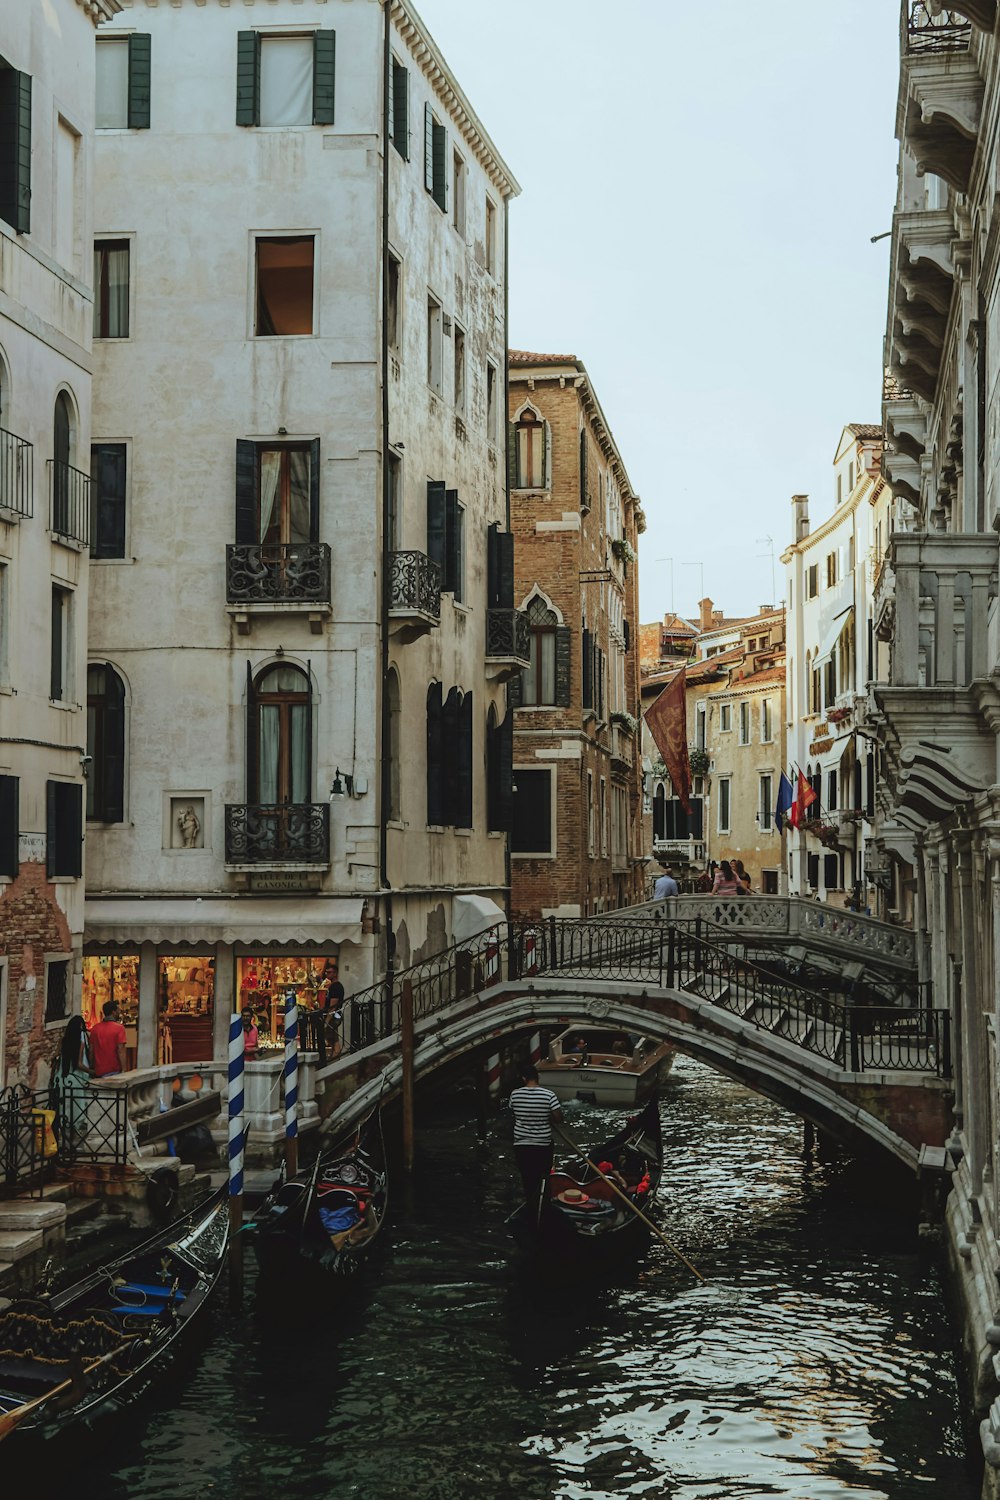 a small bridge over a small canal in a city